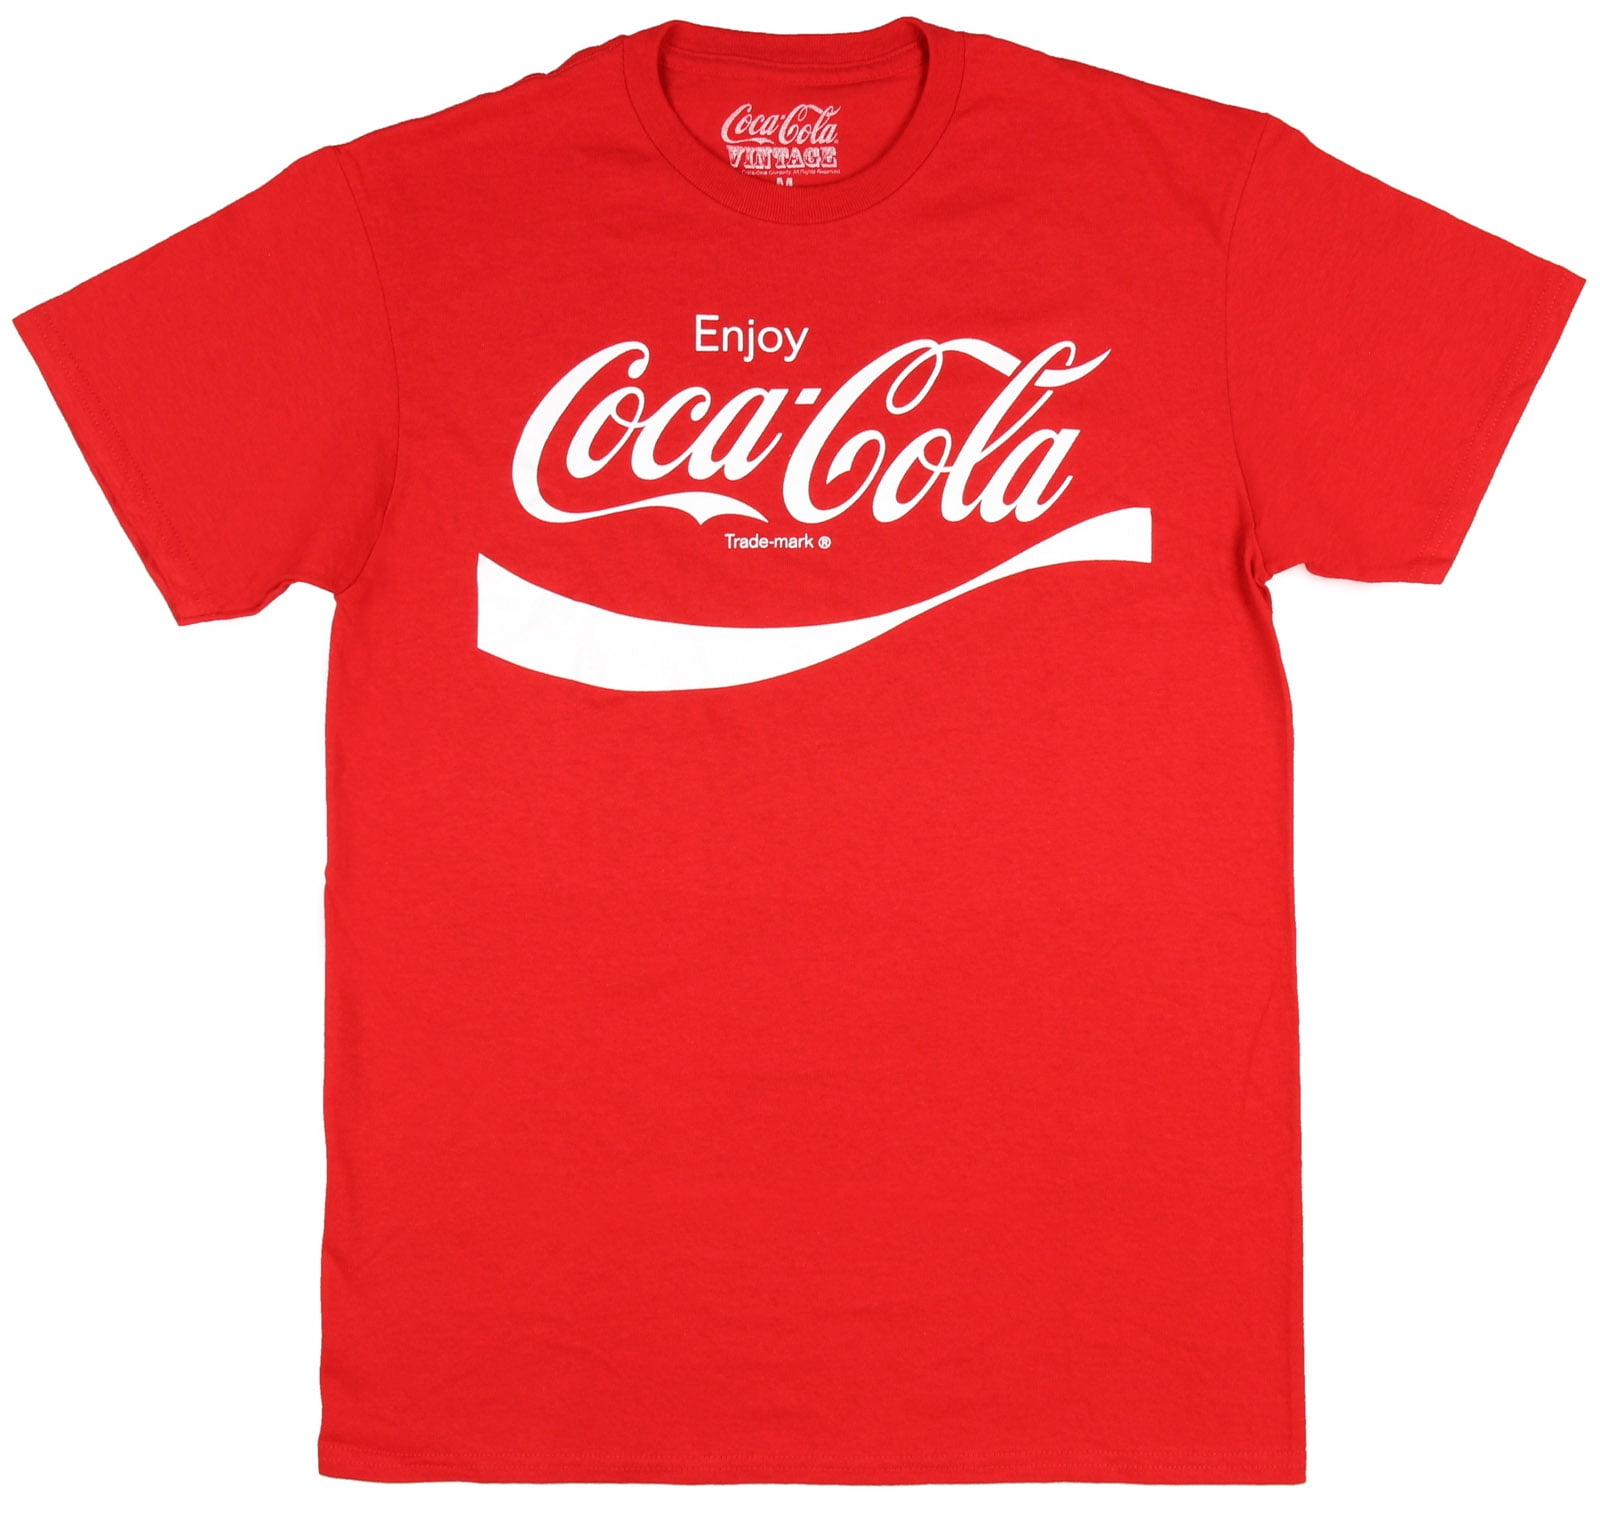 Coca-Cola T-Shirt in Classic Red Large 